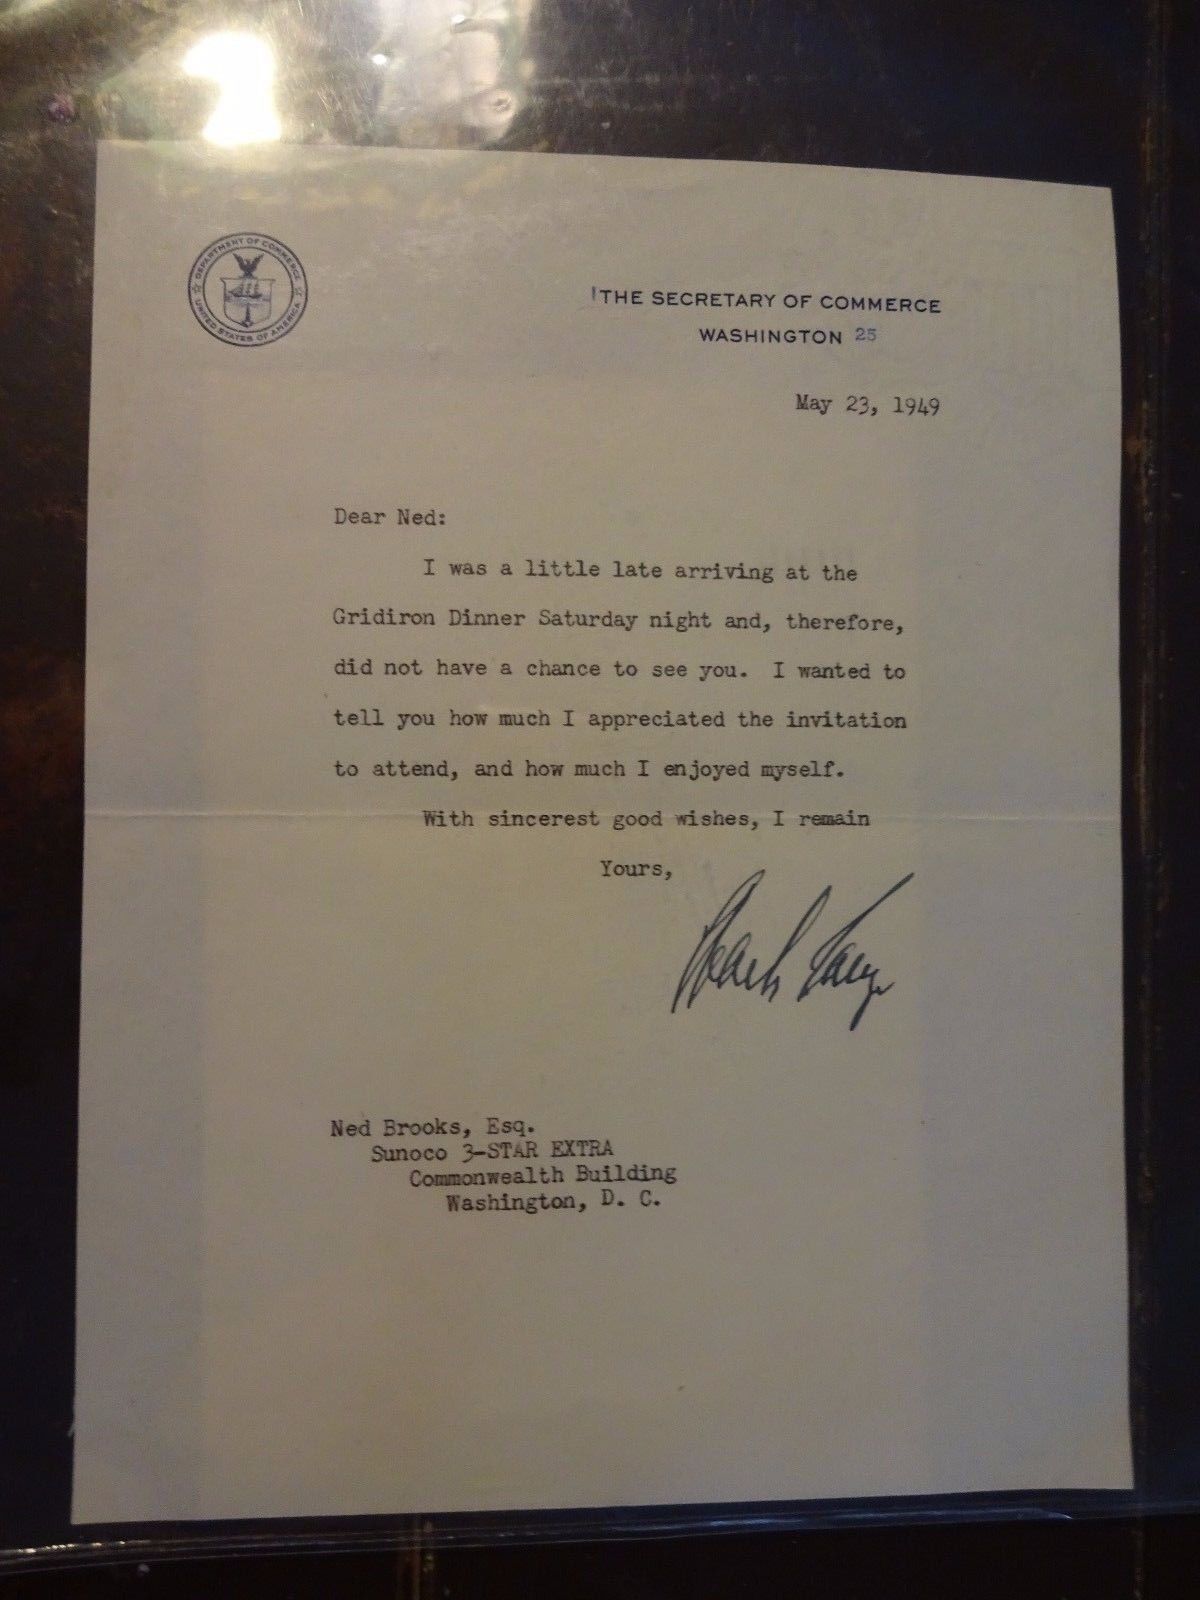 Charles W. Sawyer ORIGINAL TYPED Letter w/ Envelope to Ned Brooks - May 23, 1949